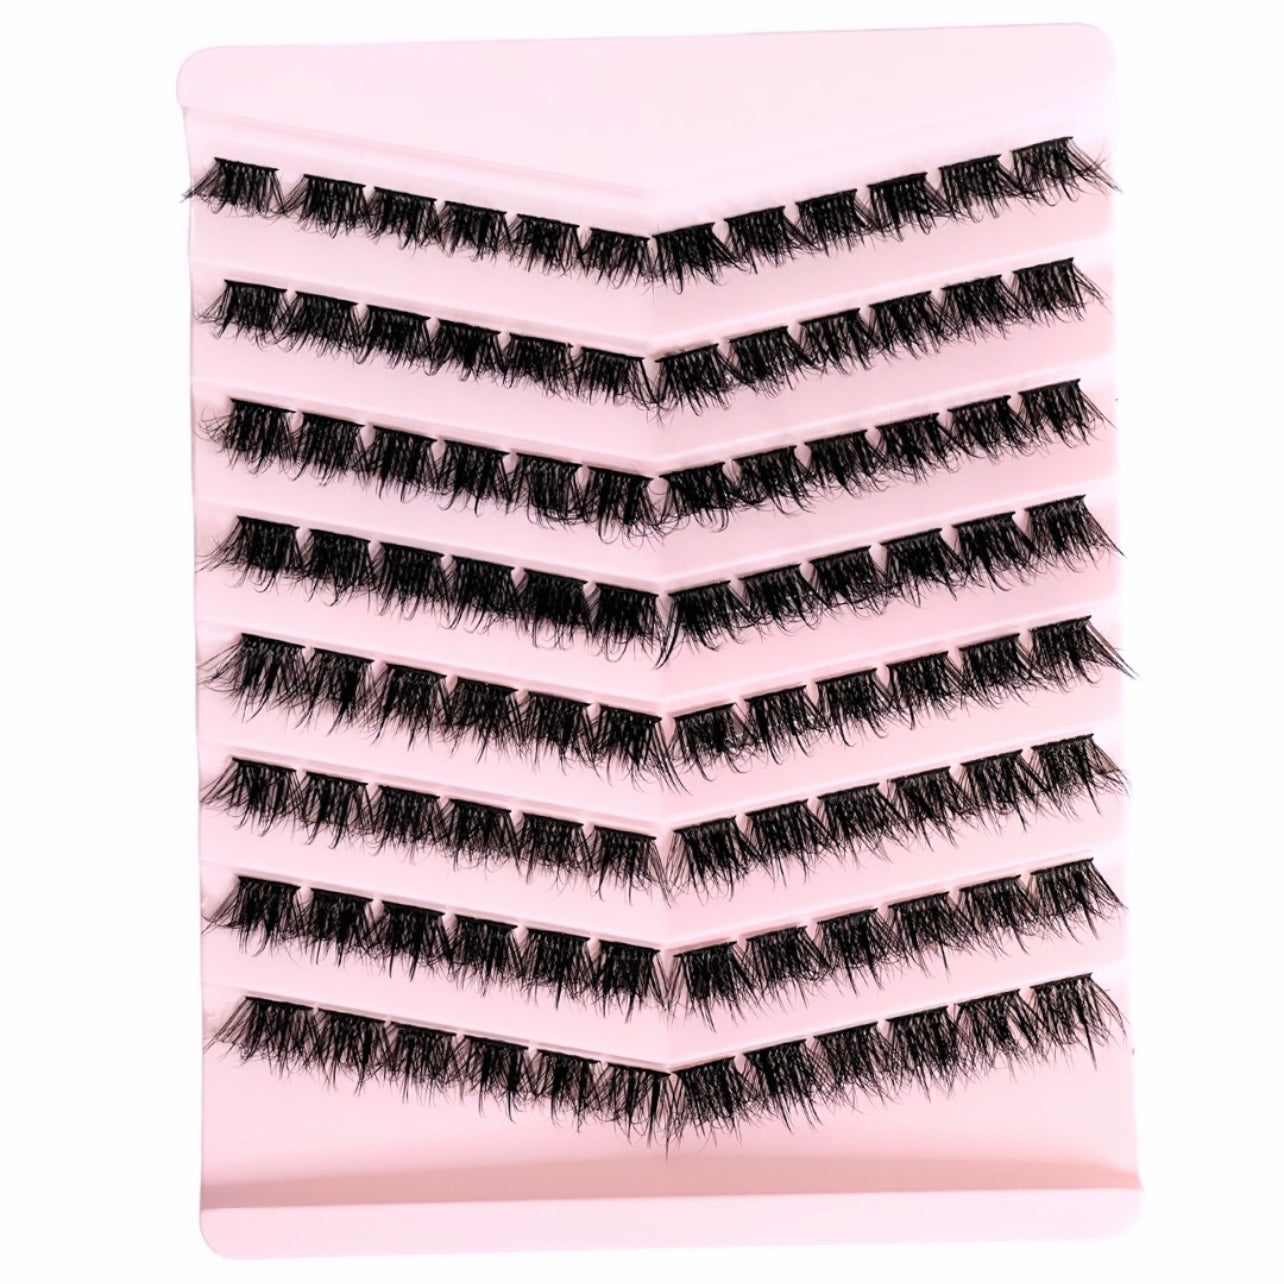 The It Girl Russian Lash Clusters